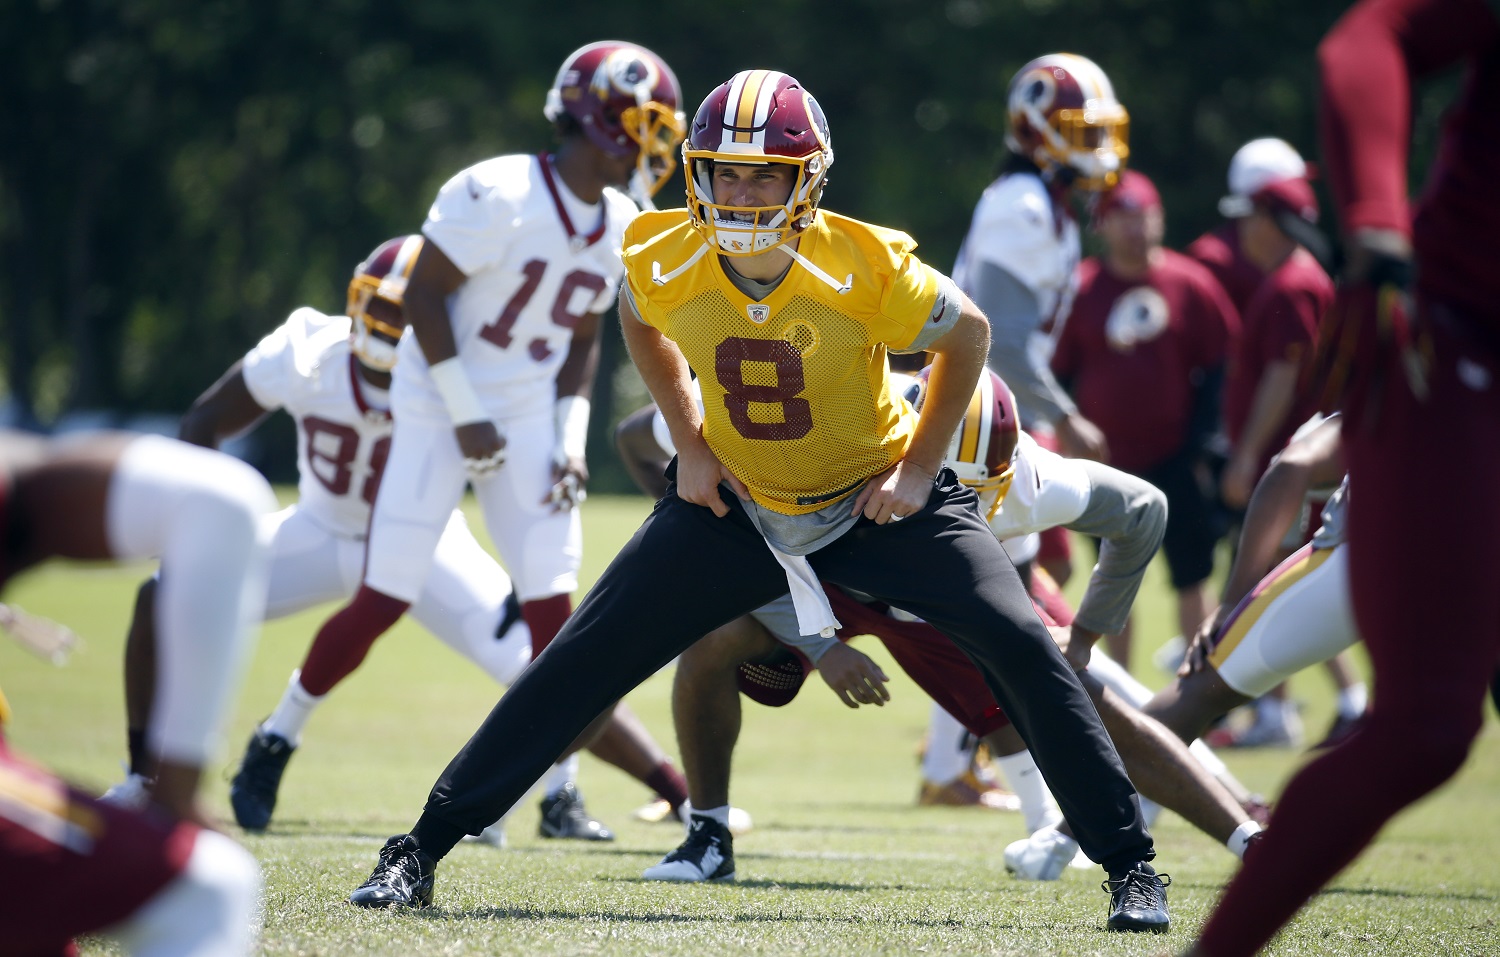 Receivers still missing as Redskins continue OTAs